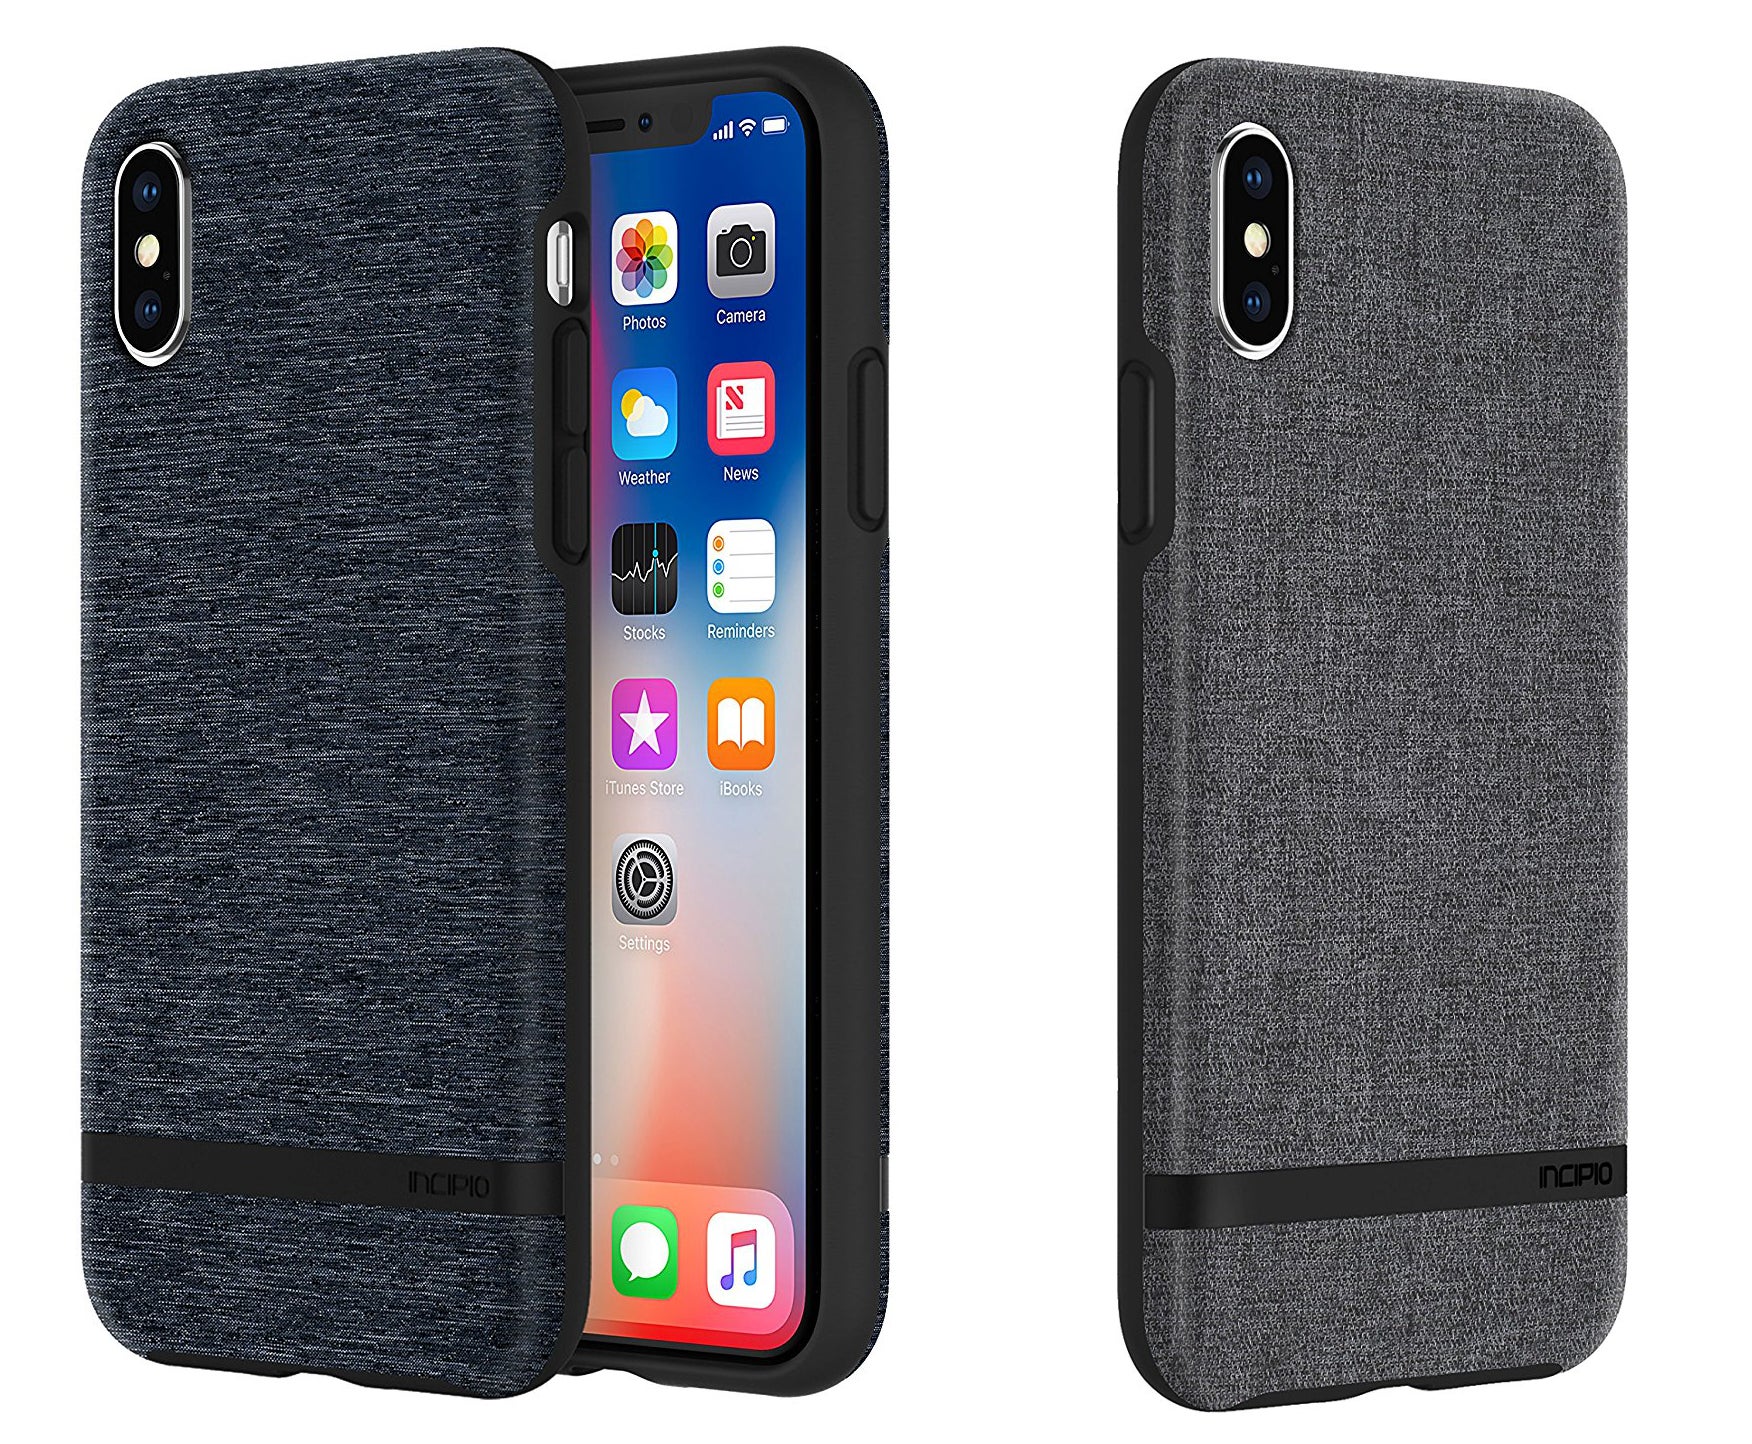 The best cases for iPhone X: thin, stylish, protective